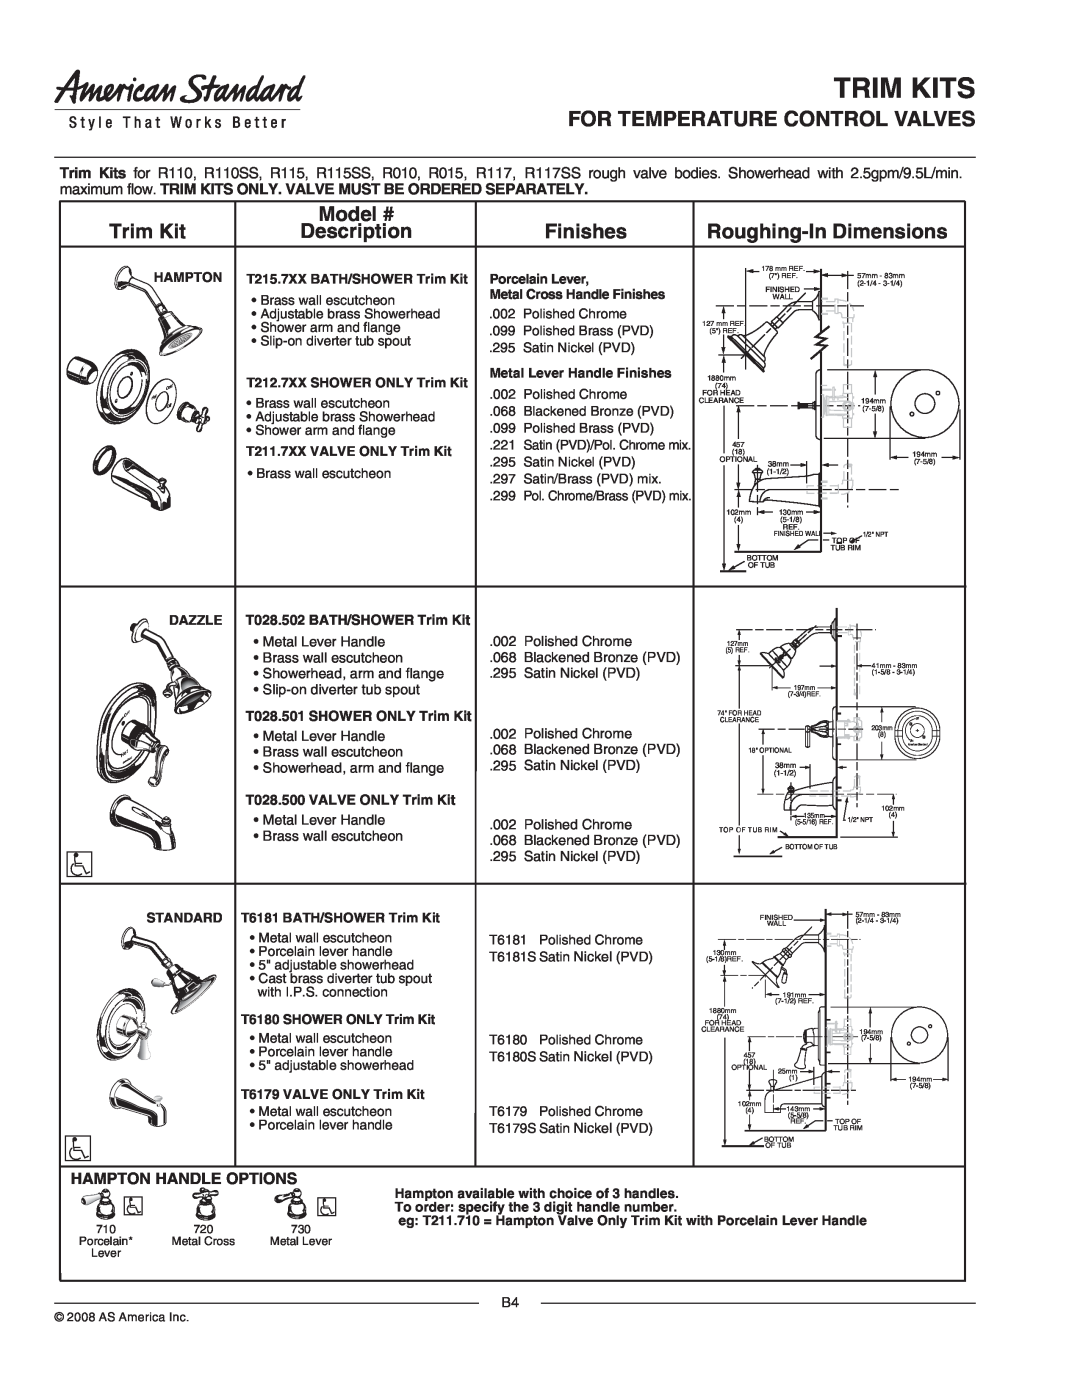 American Standard T064.502, T064.500 Trim Kits, For Temperature Control Valves, Model #, Finishes, Roughing-In Dimensions 